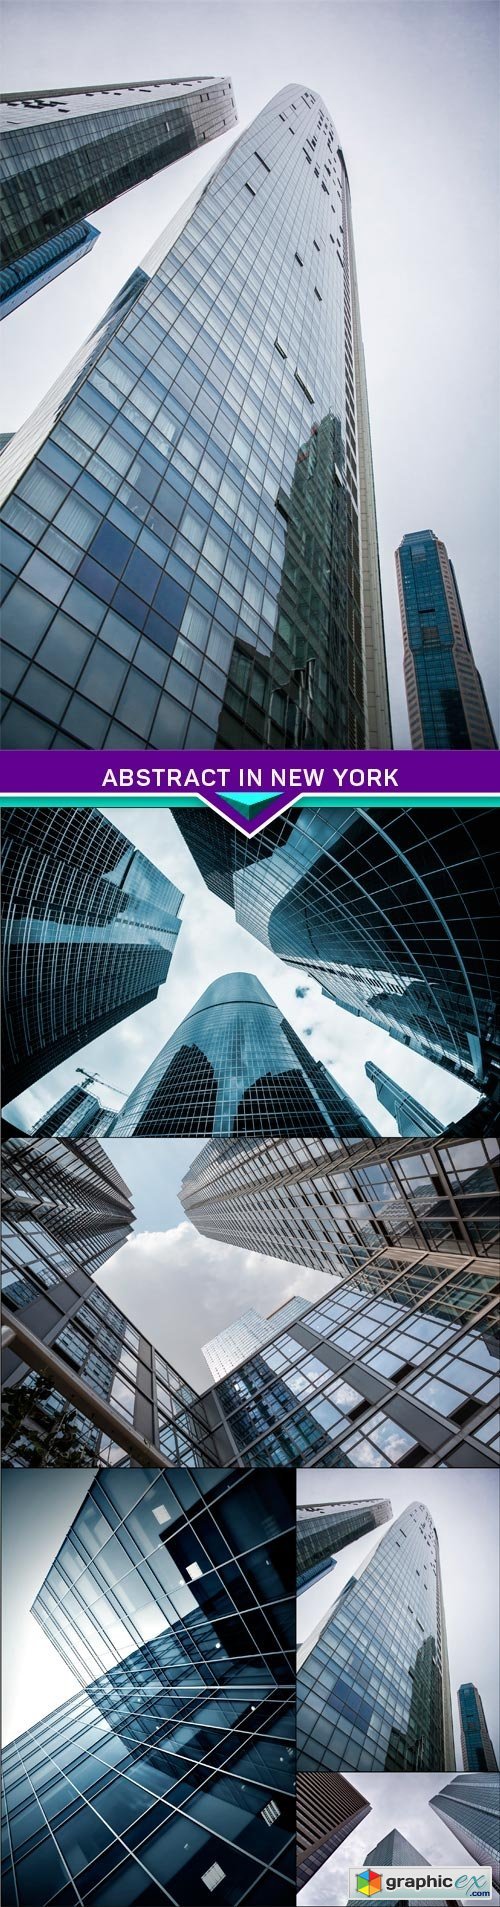 Abstract in New York 5x JPEG